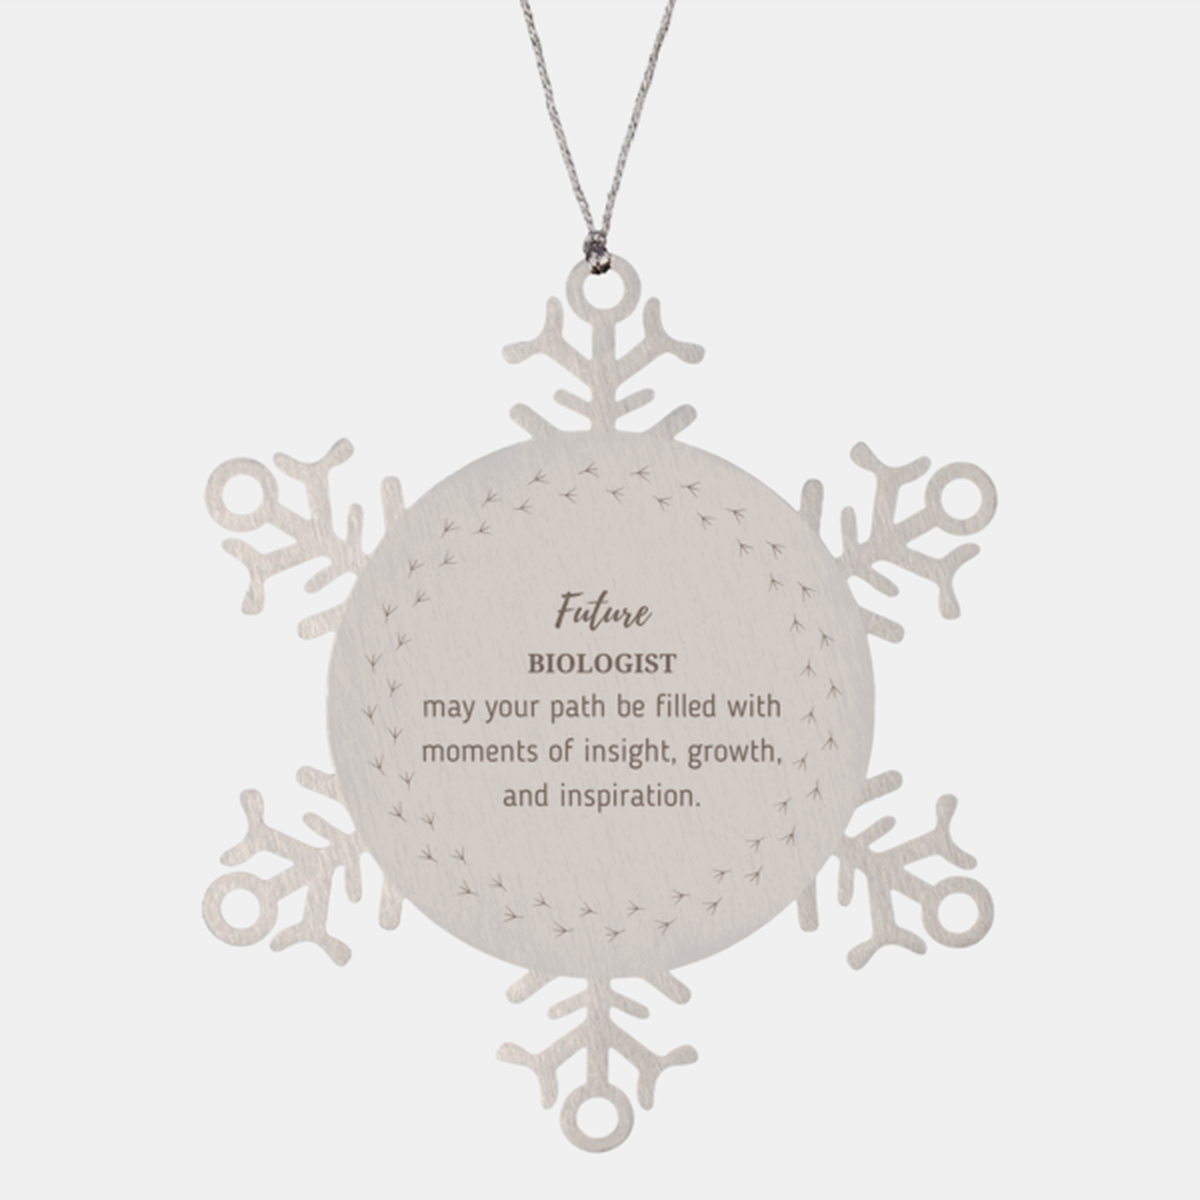 Future Biologist Gifts, May your path be filled with moments of insight, Graduation Gifts for New Biologist, Christmas Unique Snowflake Ornament For Men, Women, Friends